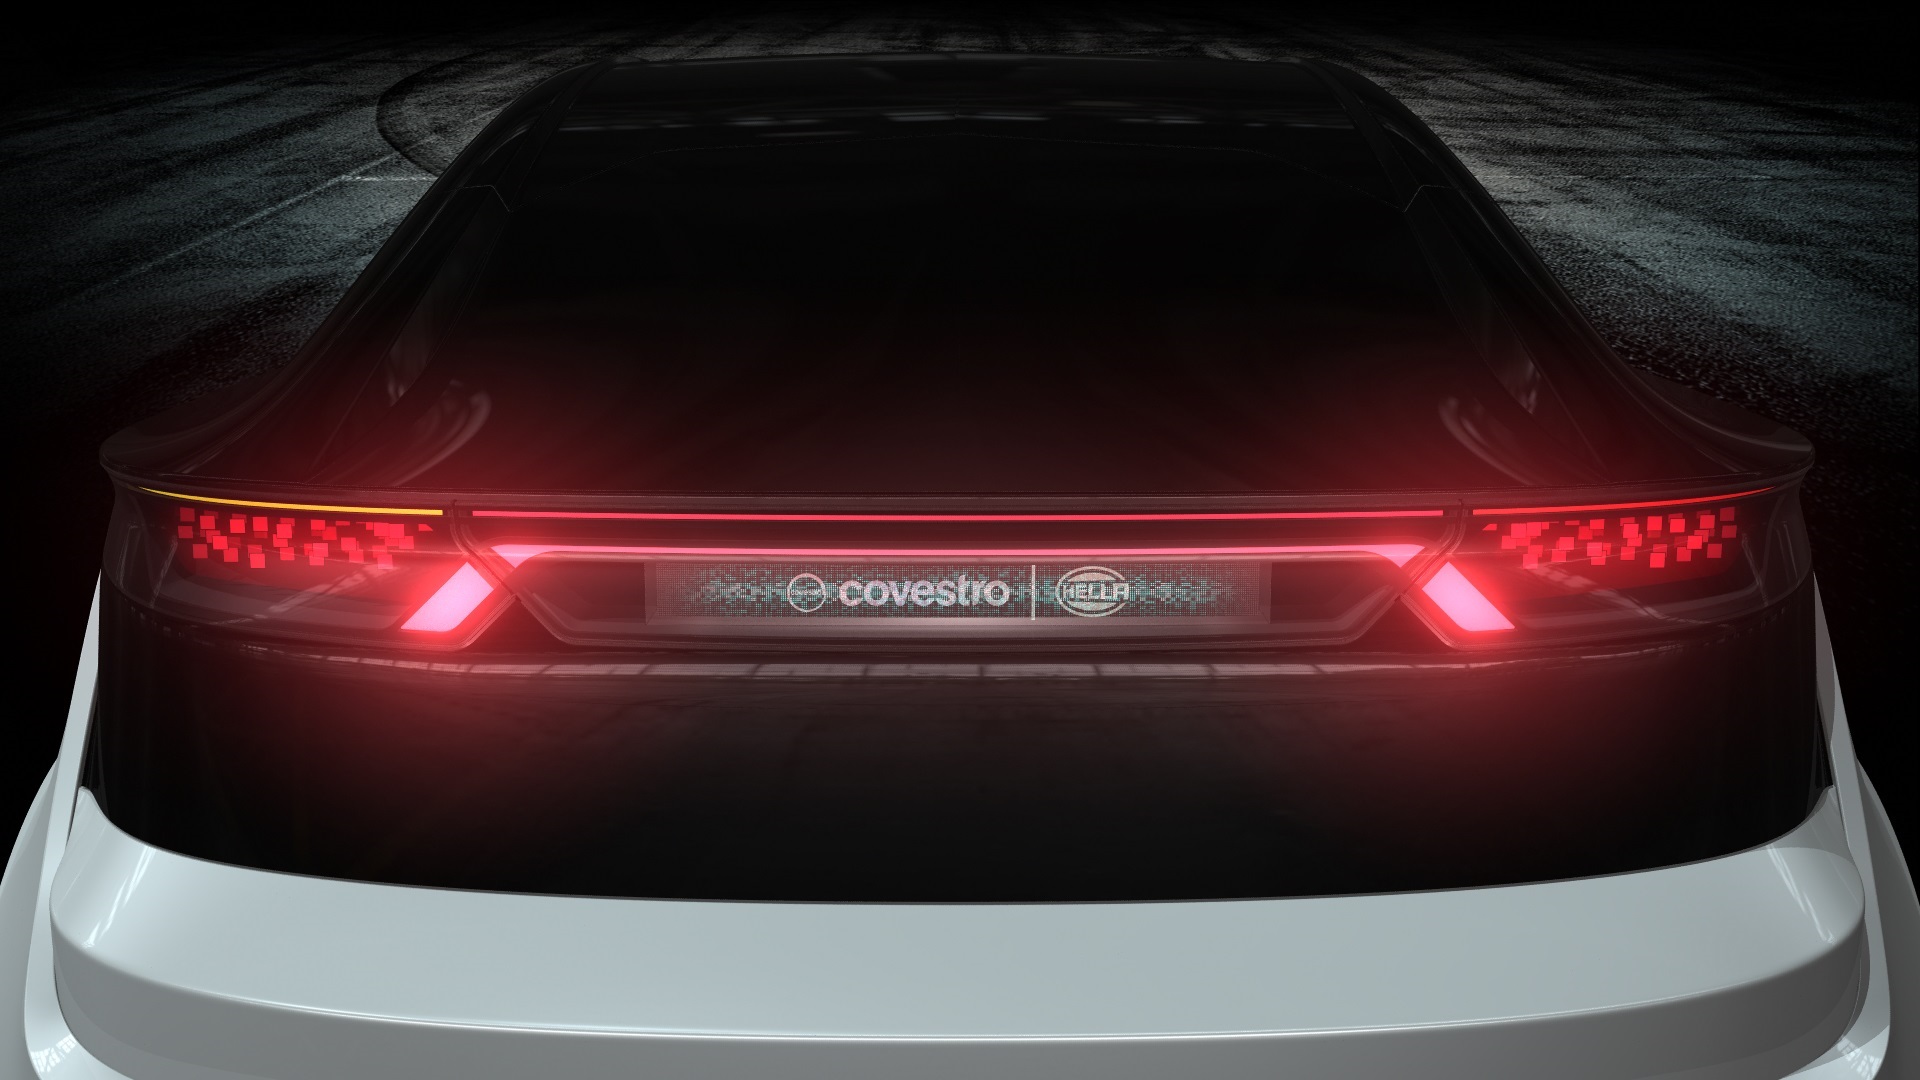 The rear lighting is equipped with holographic technology